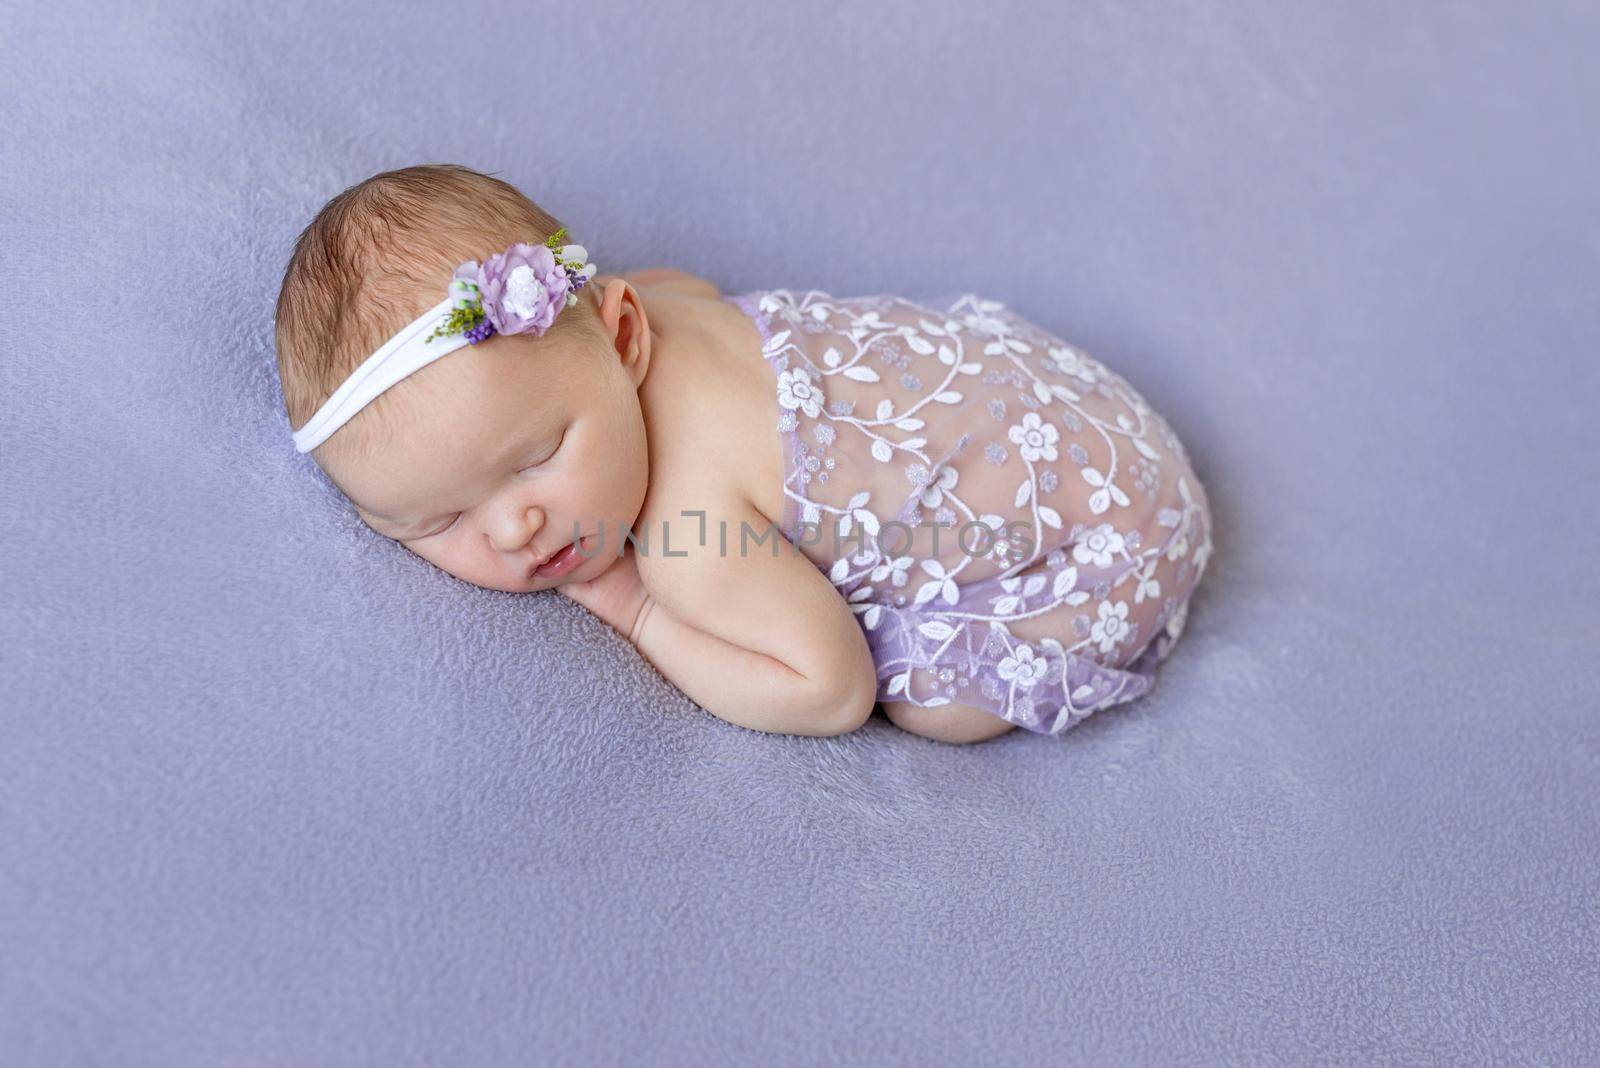 Cute infant sleeping covered with purple veil with flowers on purple soft surface